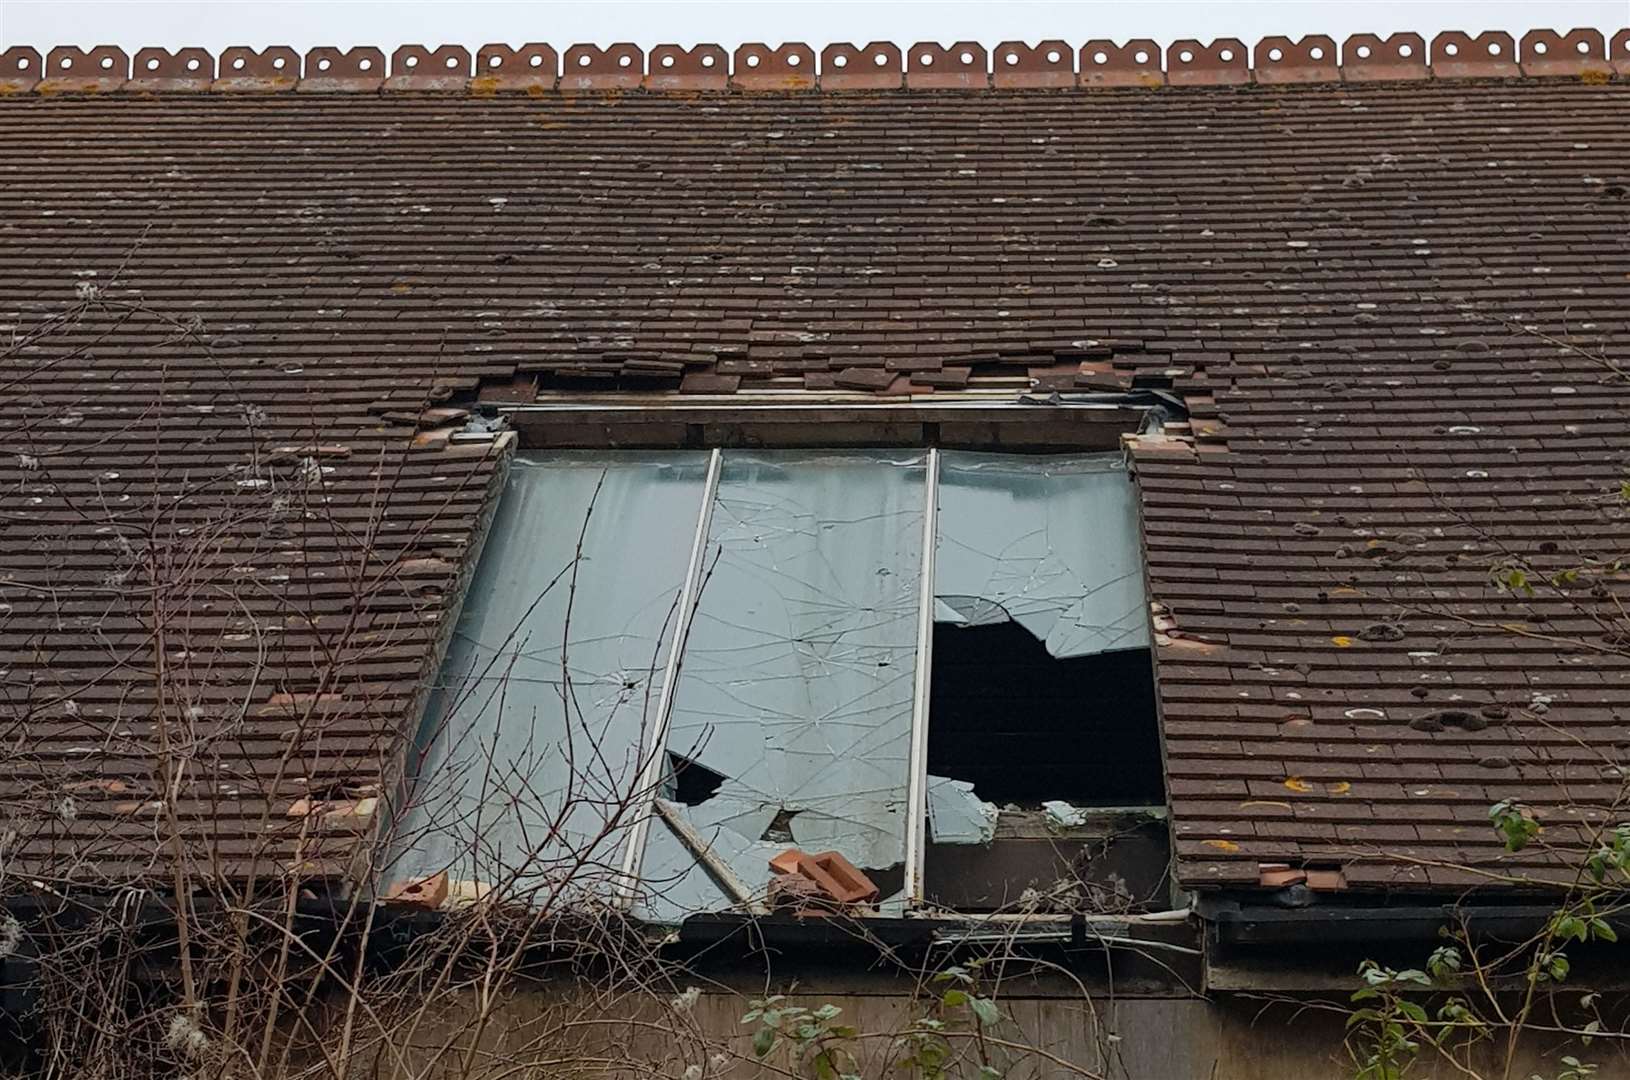 Broken window on the Kiln Court site, which closed in 2016